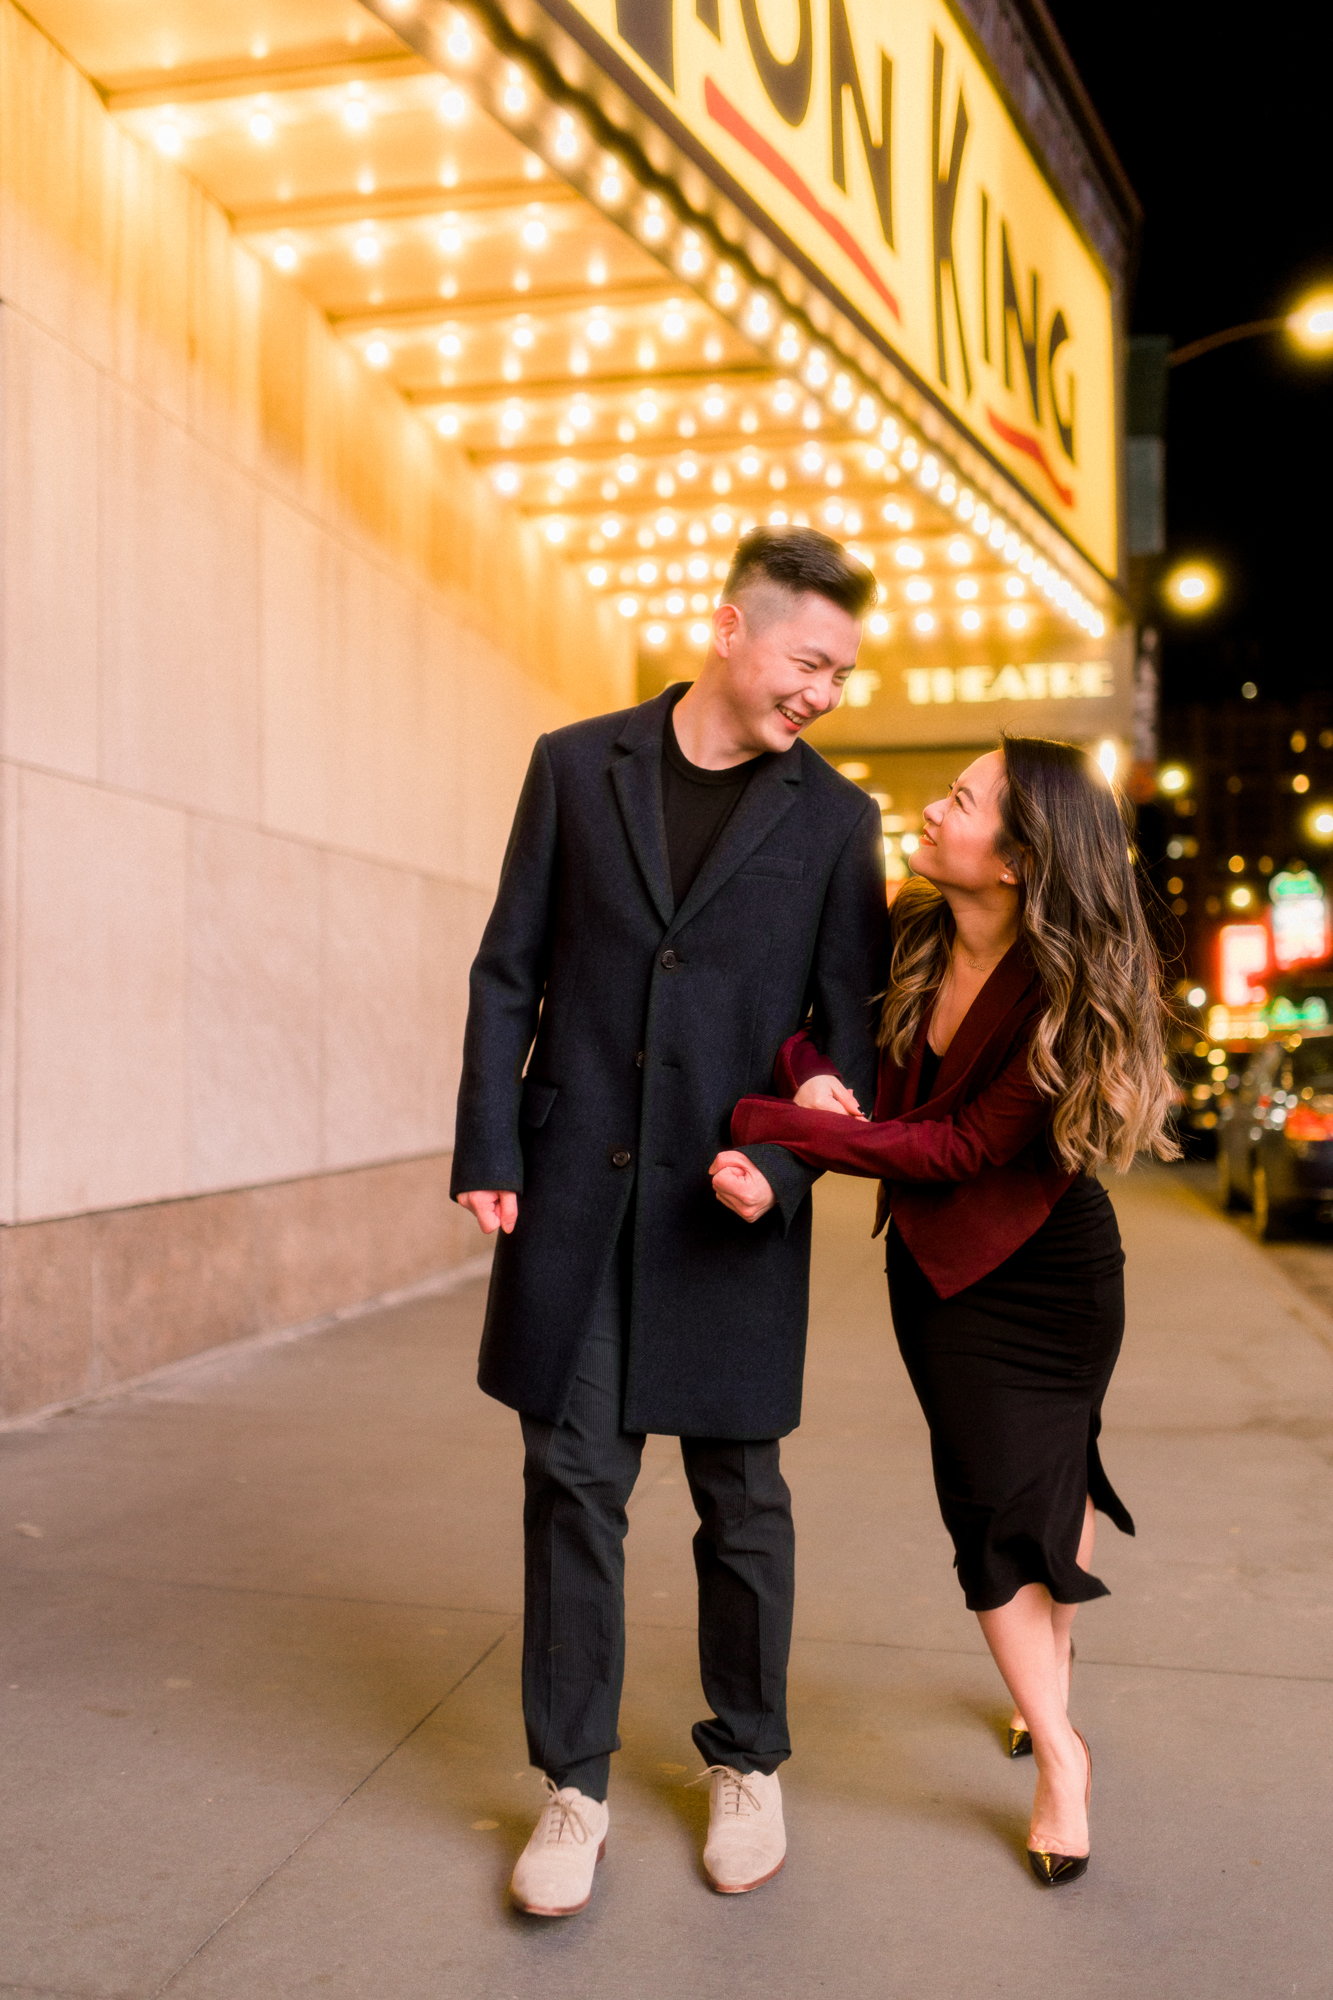 Perfect Nighttime Winter Engagement Photos in New York's Iconic Times Square